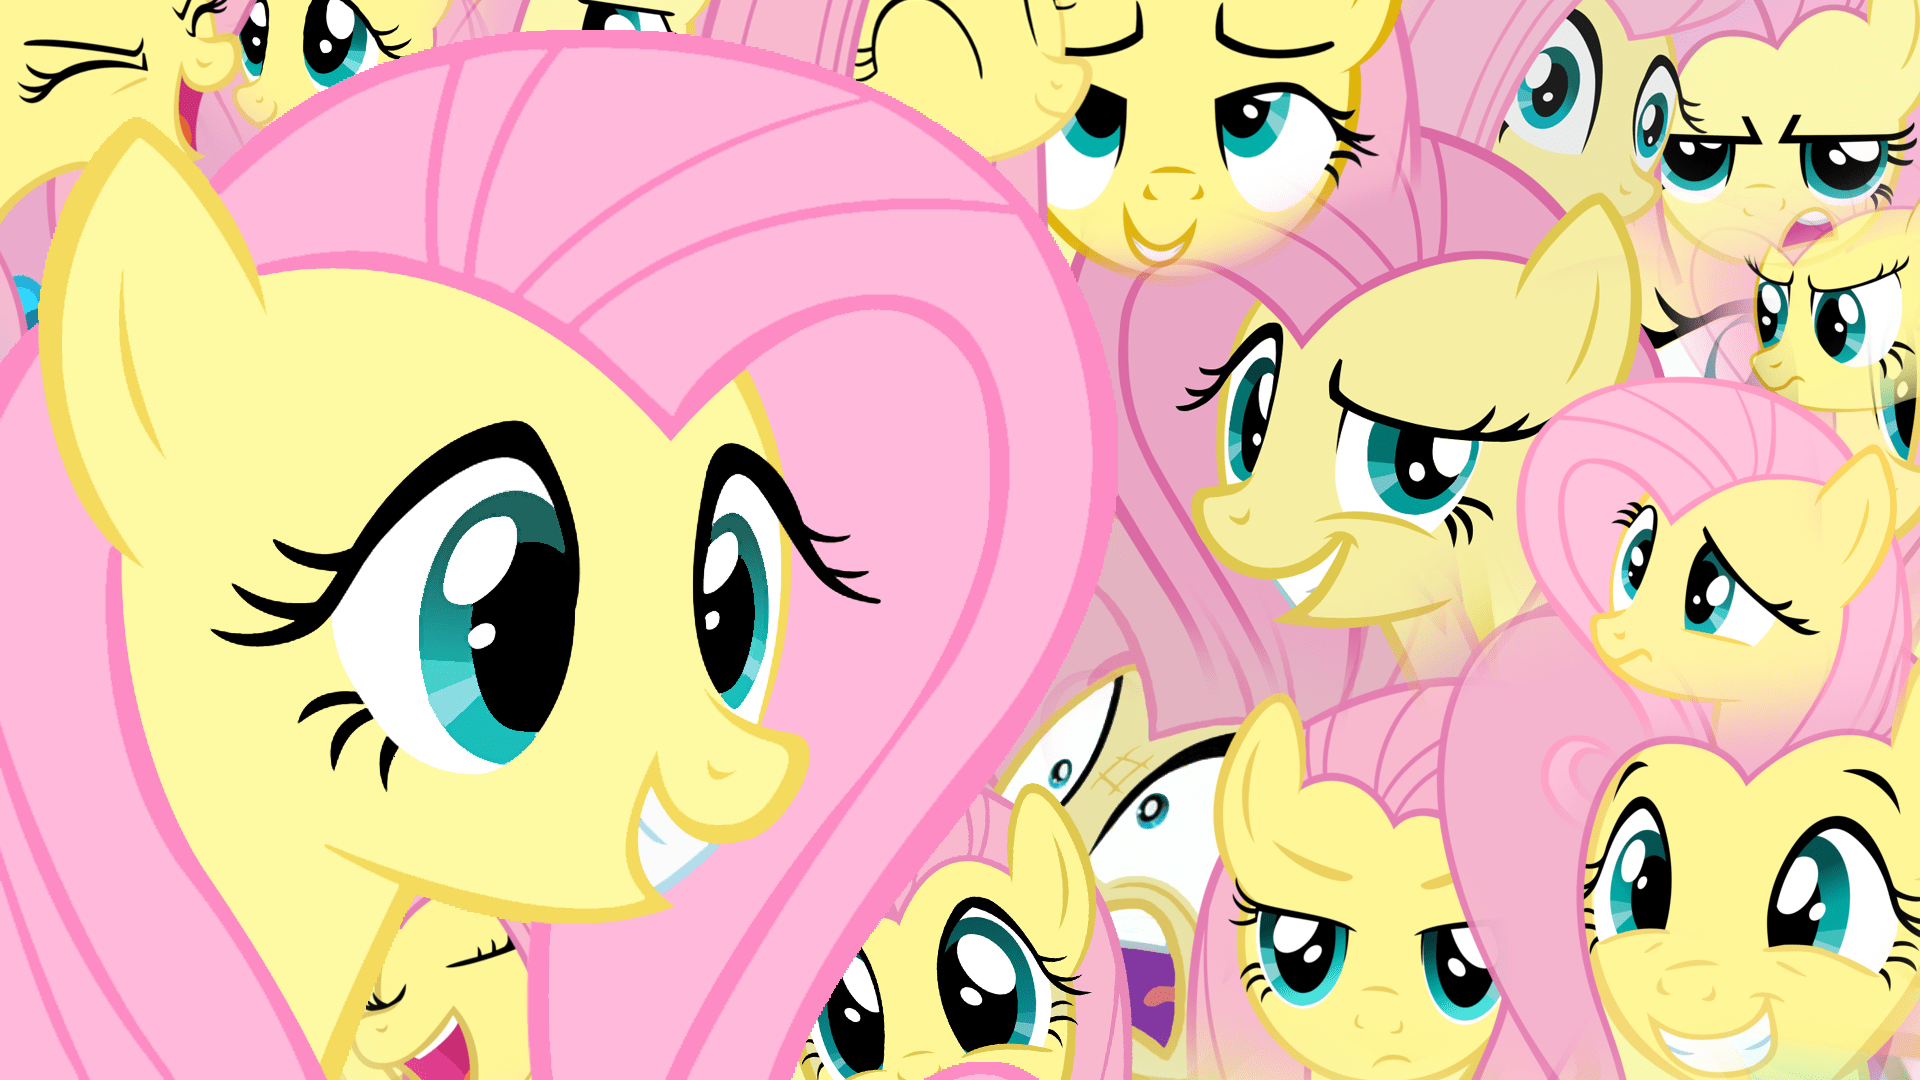 539790 1920x1080 Fluttershy My Little Pony wallpaper PNG  Rare Gallery  HD Wallpapers